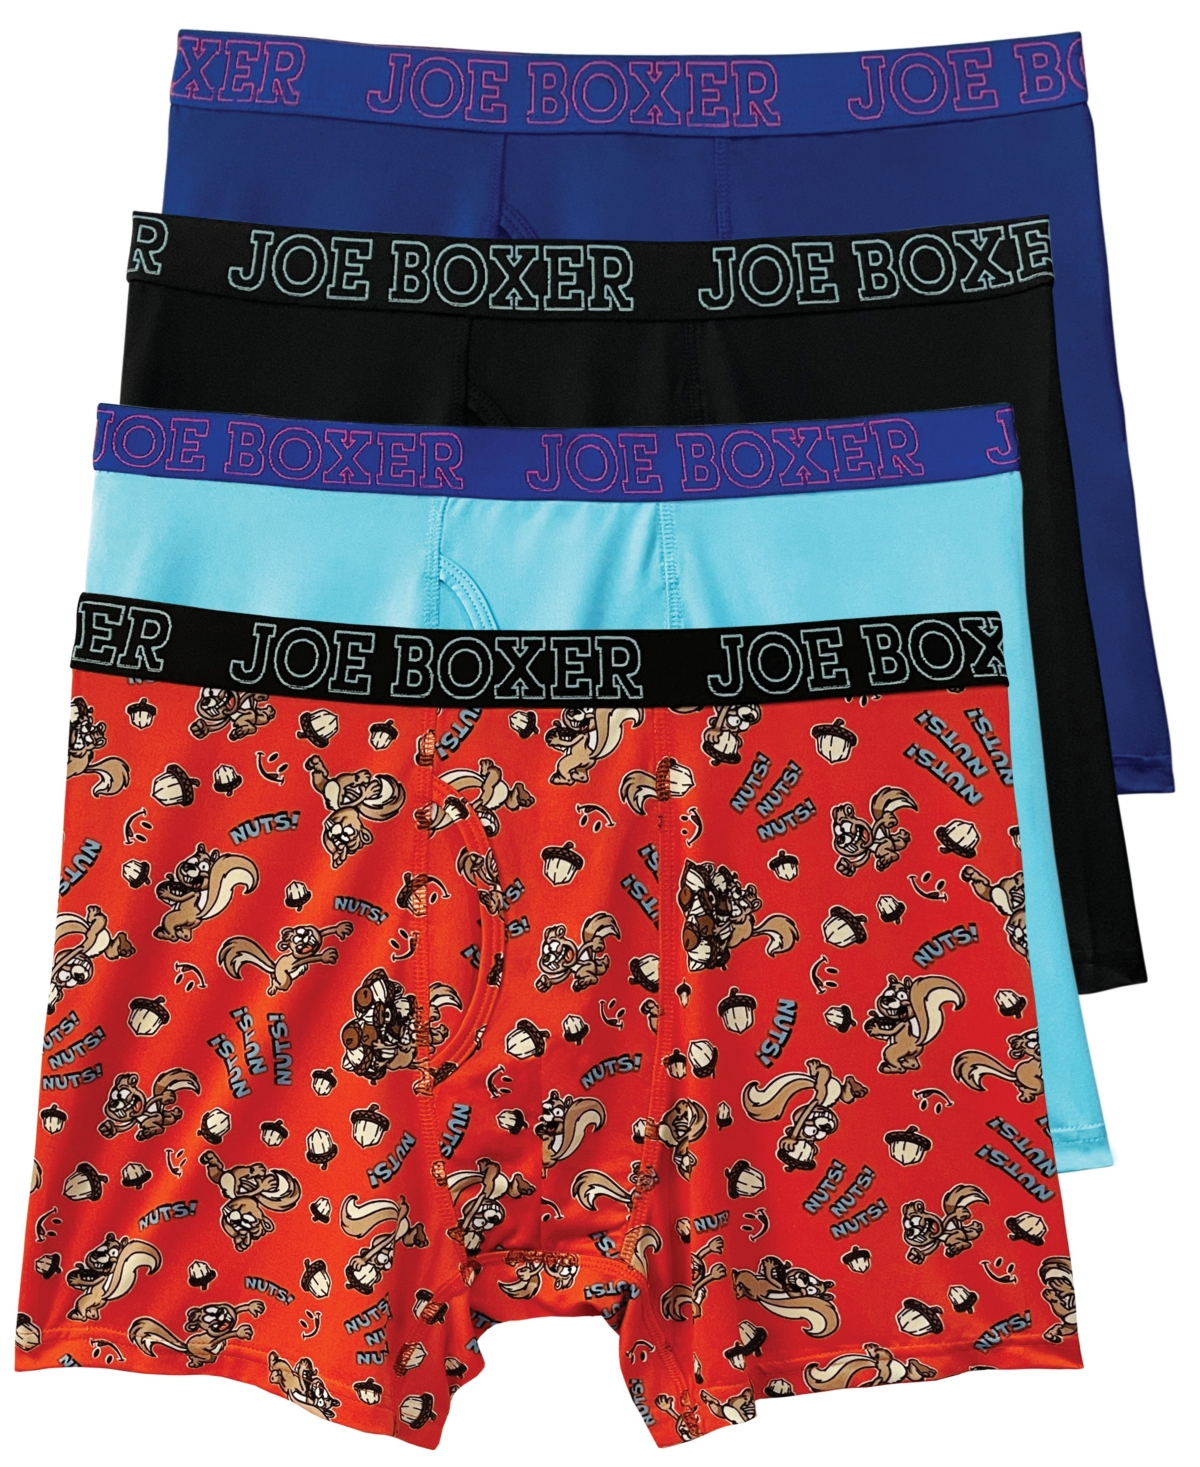 Men's Squirrel Nuts Boxer Briefs, Pack of 4 - Blue